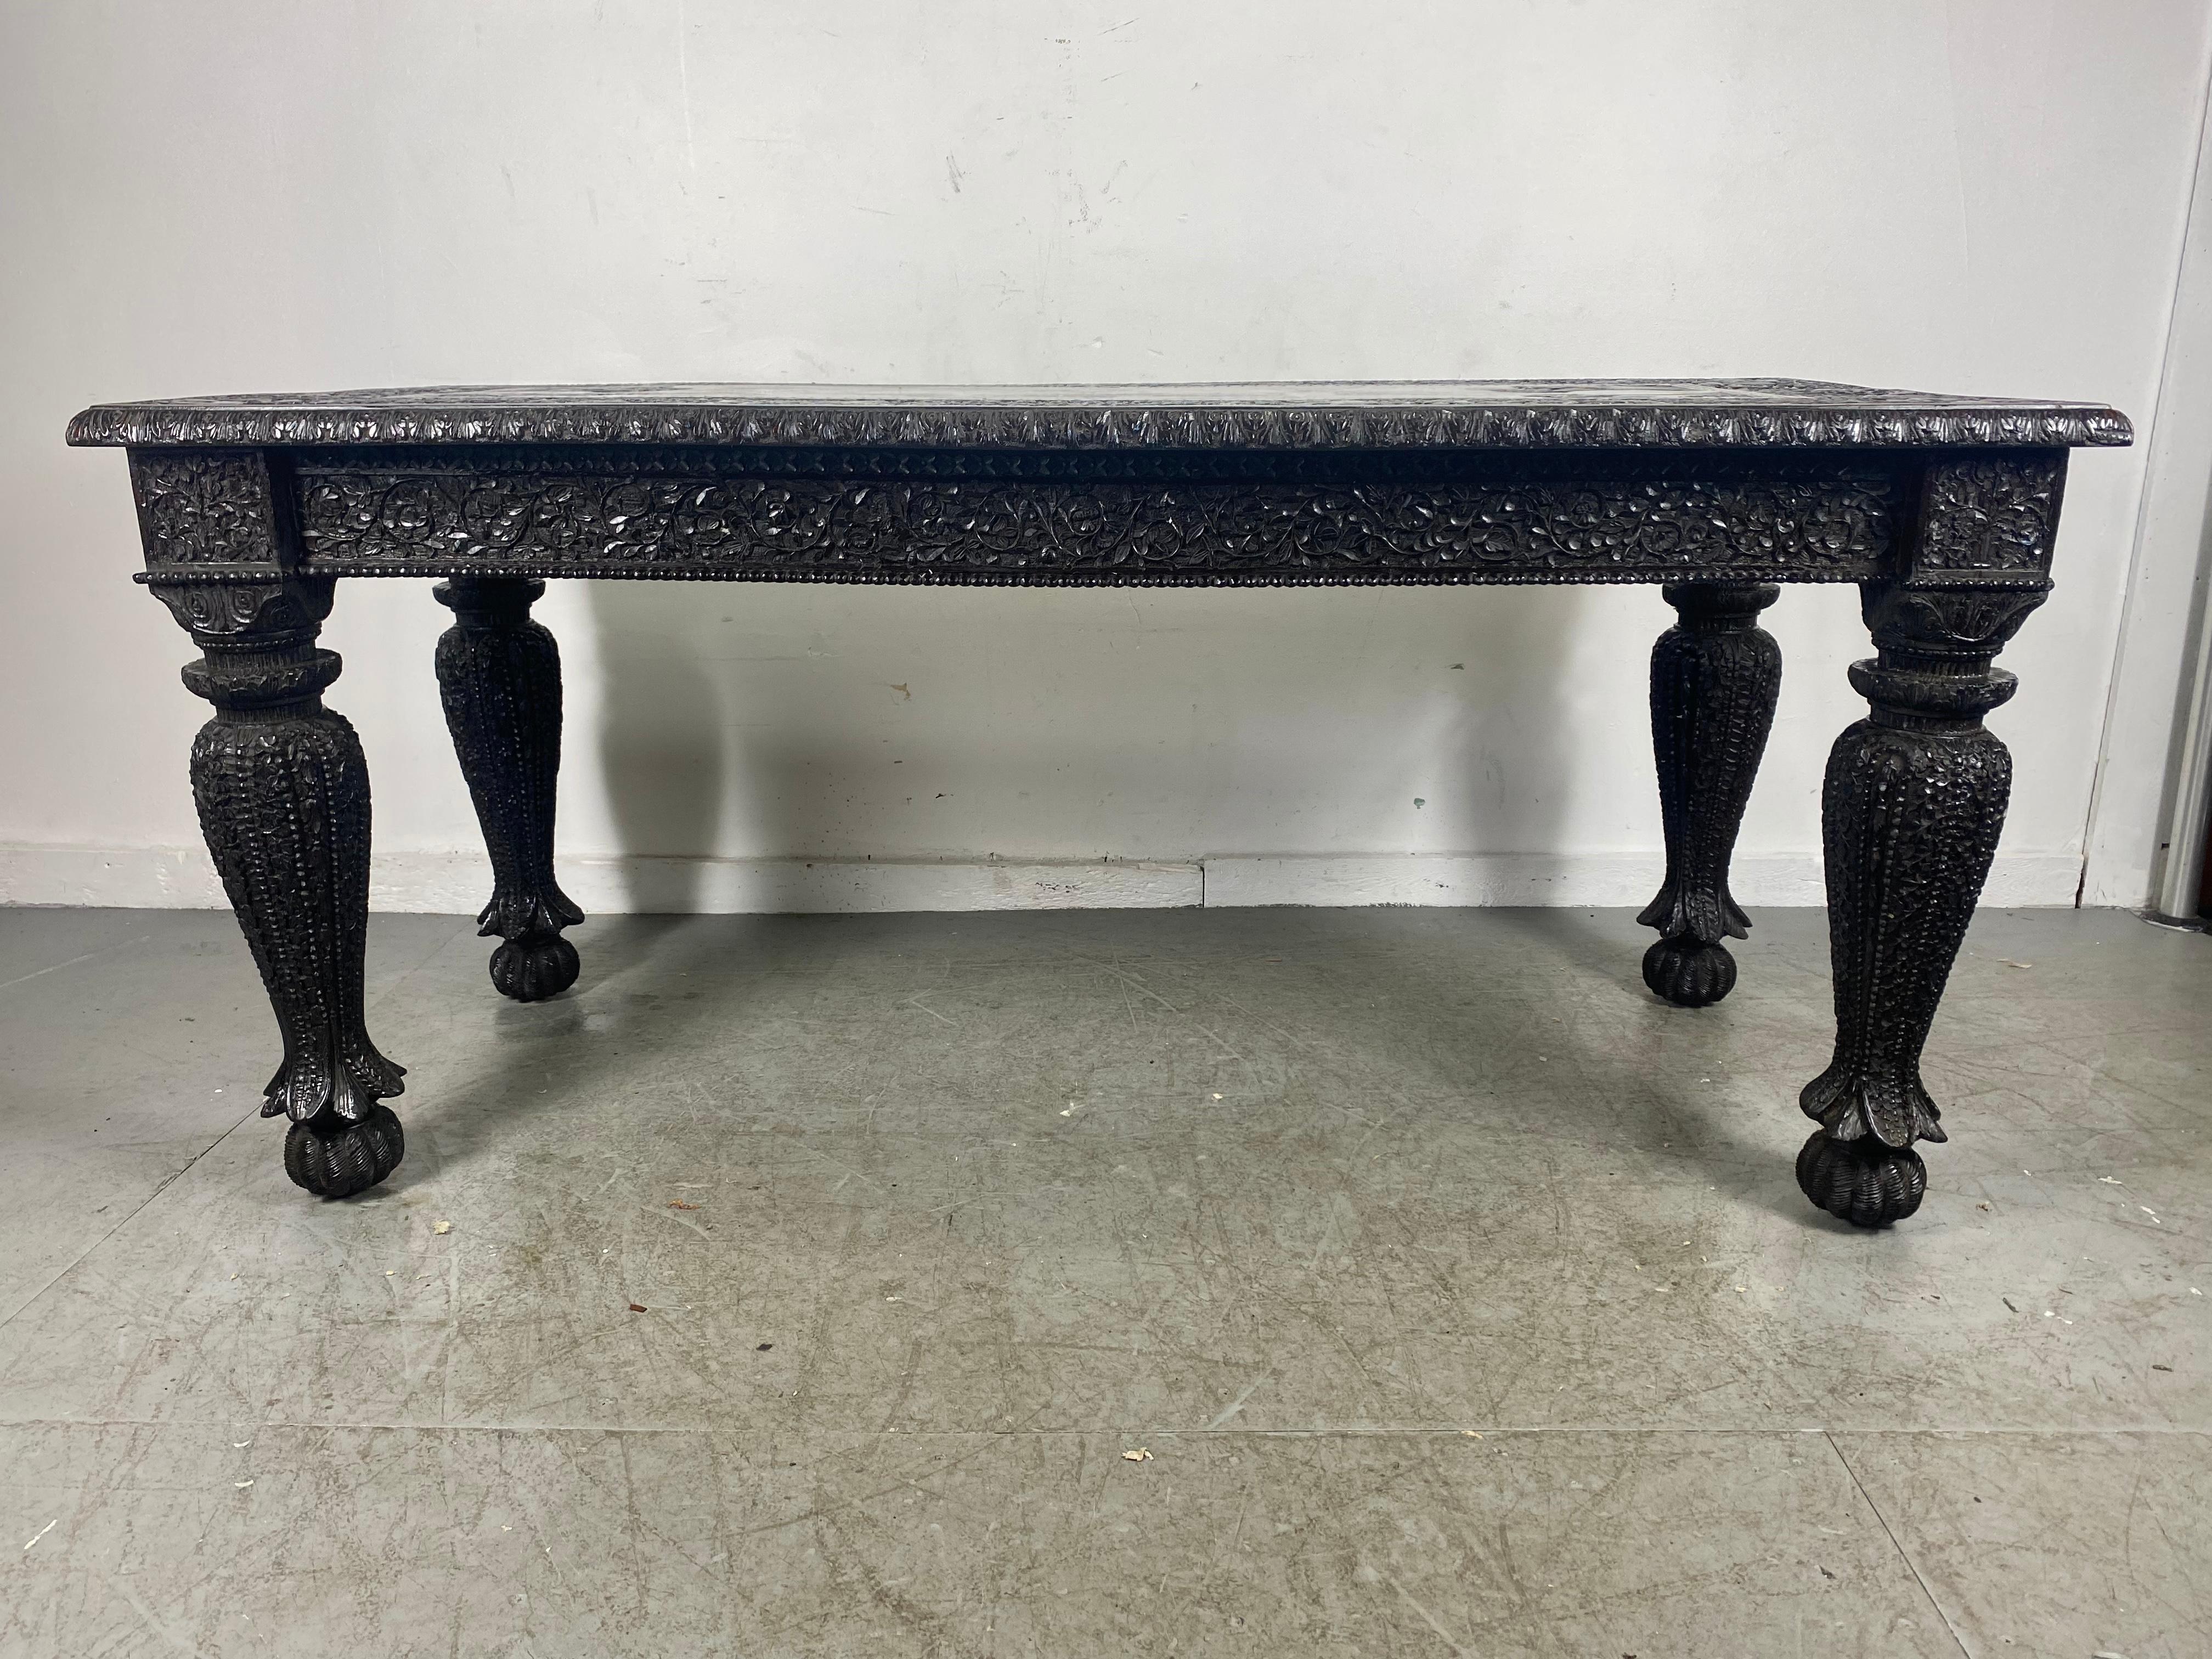 Exquisetly Carved Turn or the Century AngloIndian Table, Dining / Desk / Library 13